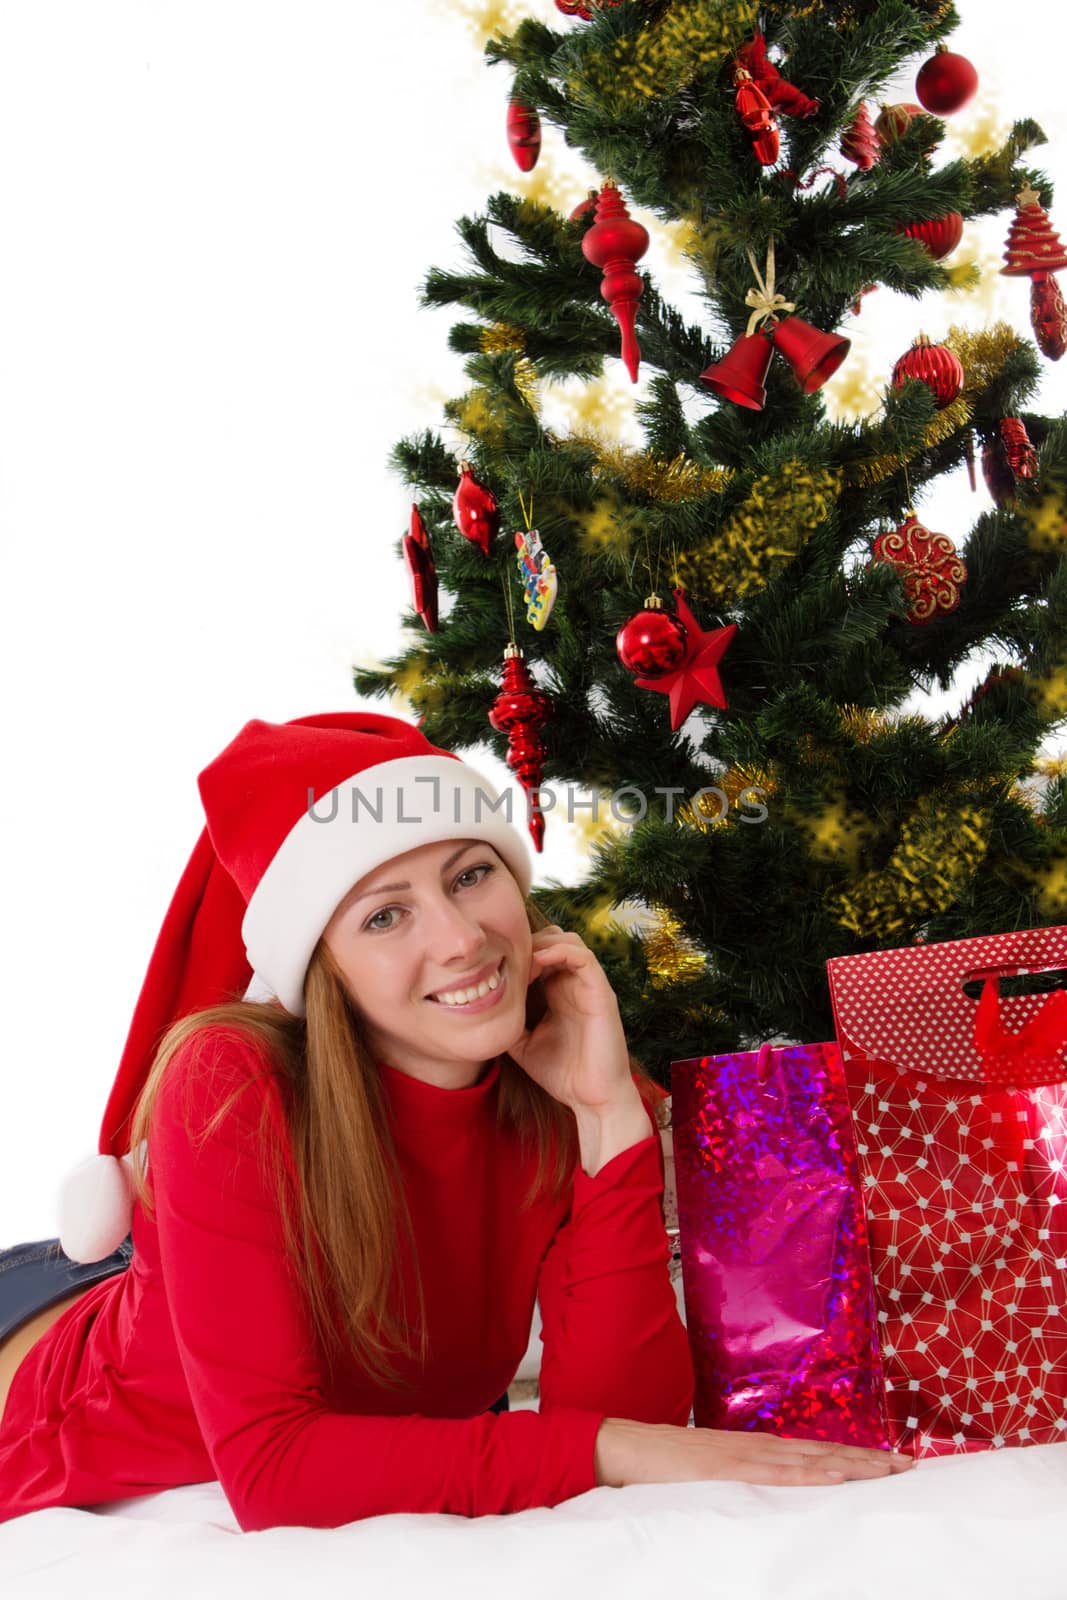 Woman in red lying under Christmas tree with gifts by Angel_a